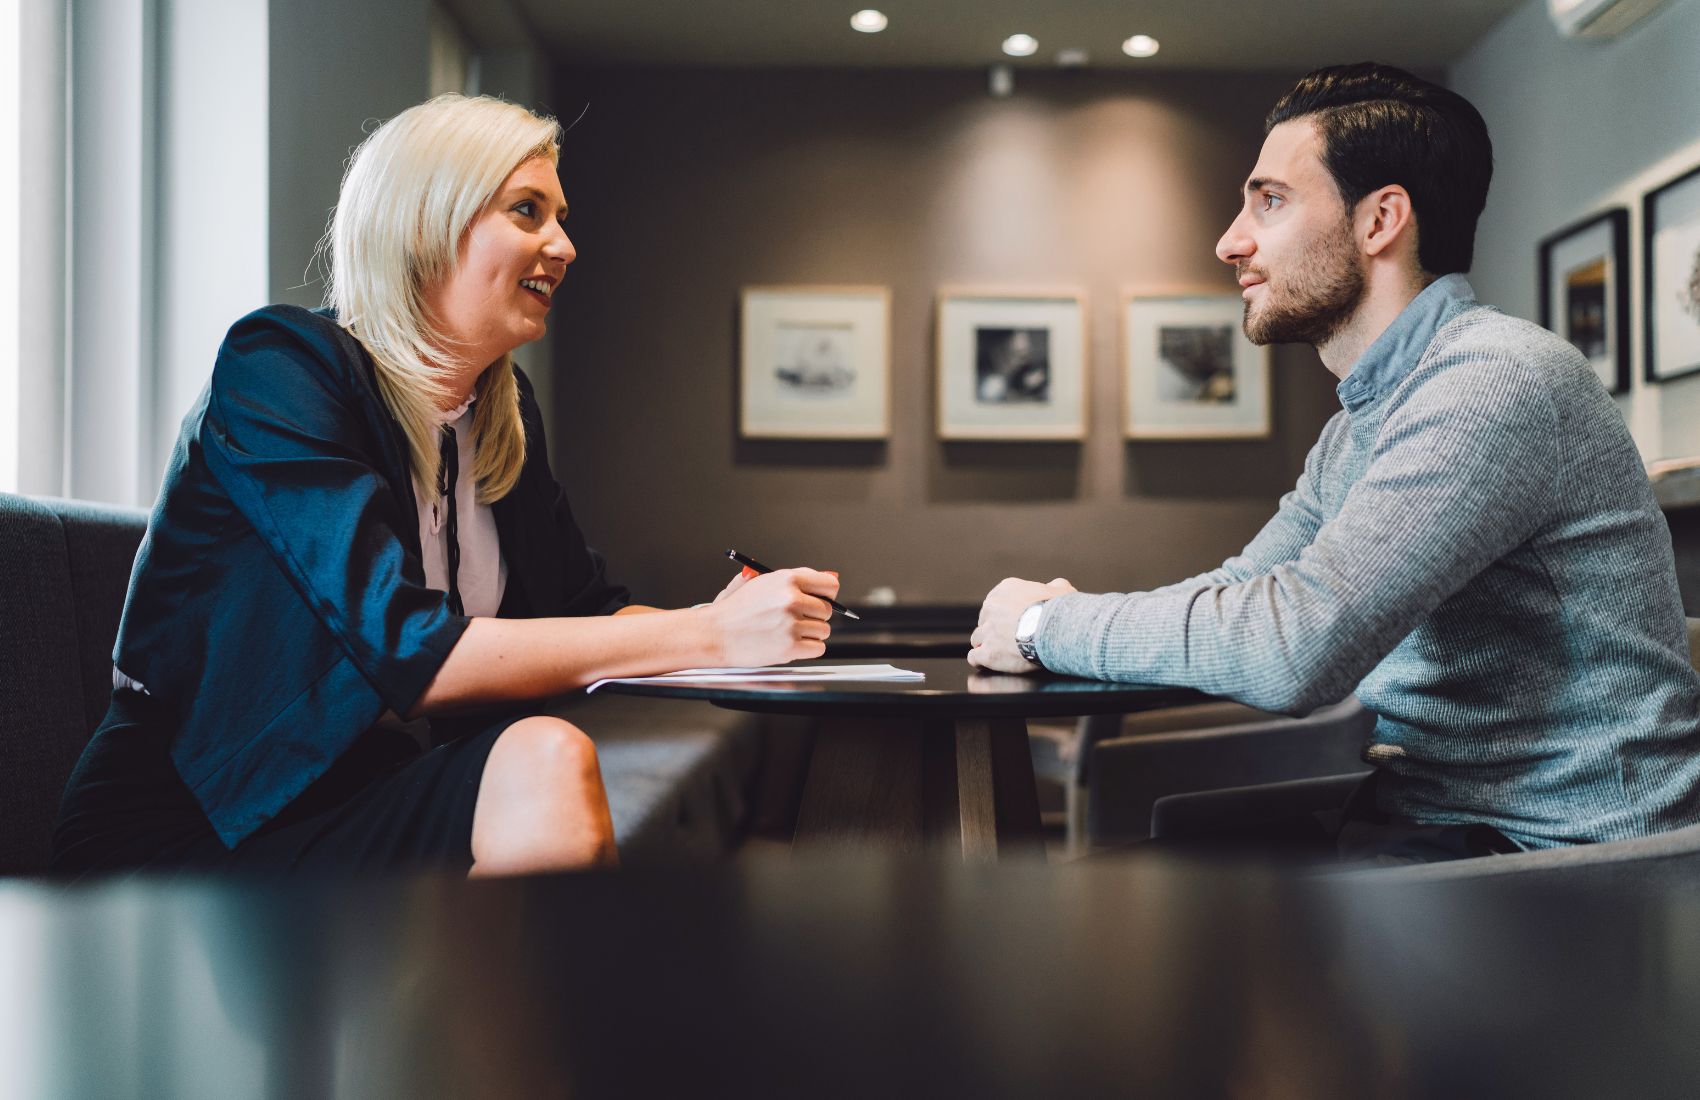 One on One Employer meeting discussing renumeration | Featured Image for the blog on Facilitating Remuneration Conversations Effectively from Bramwell Partners